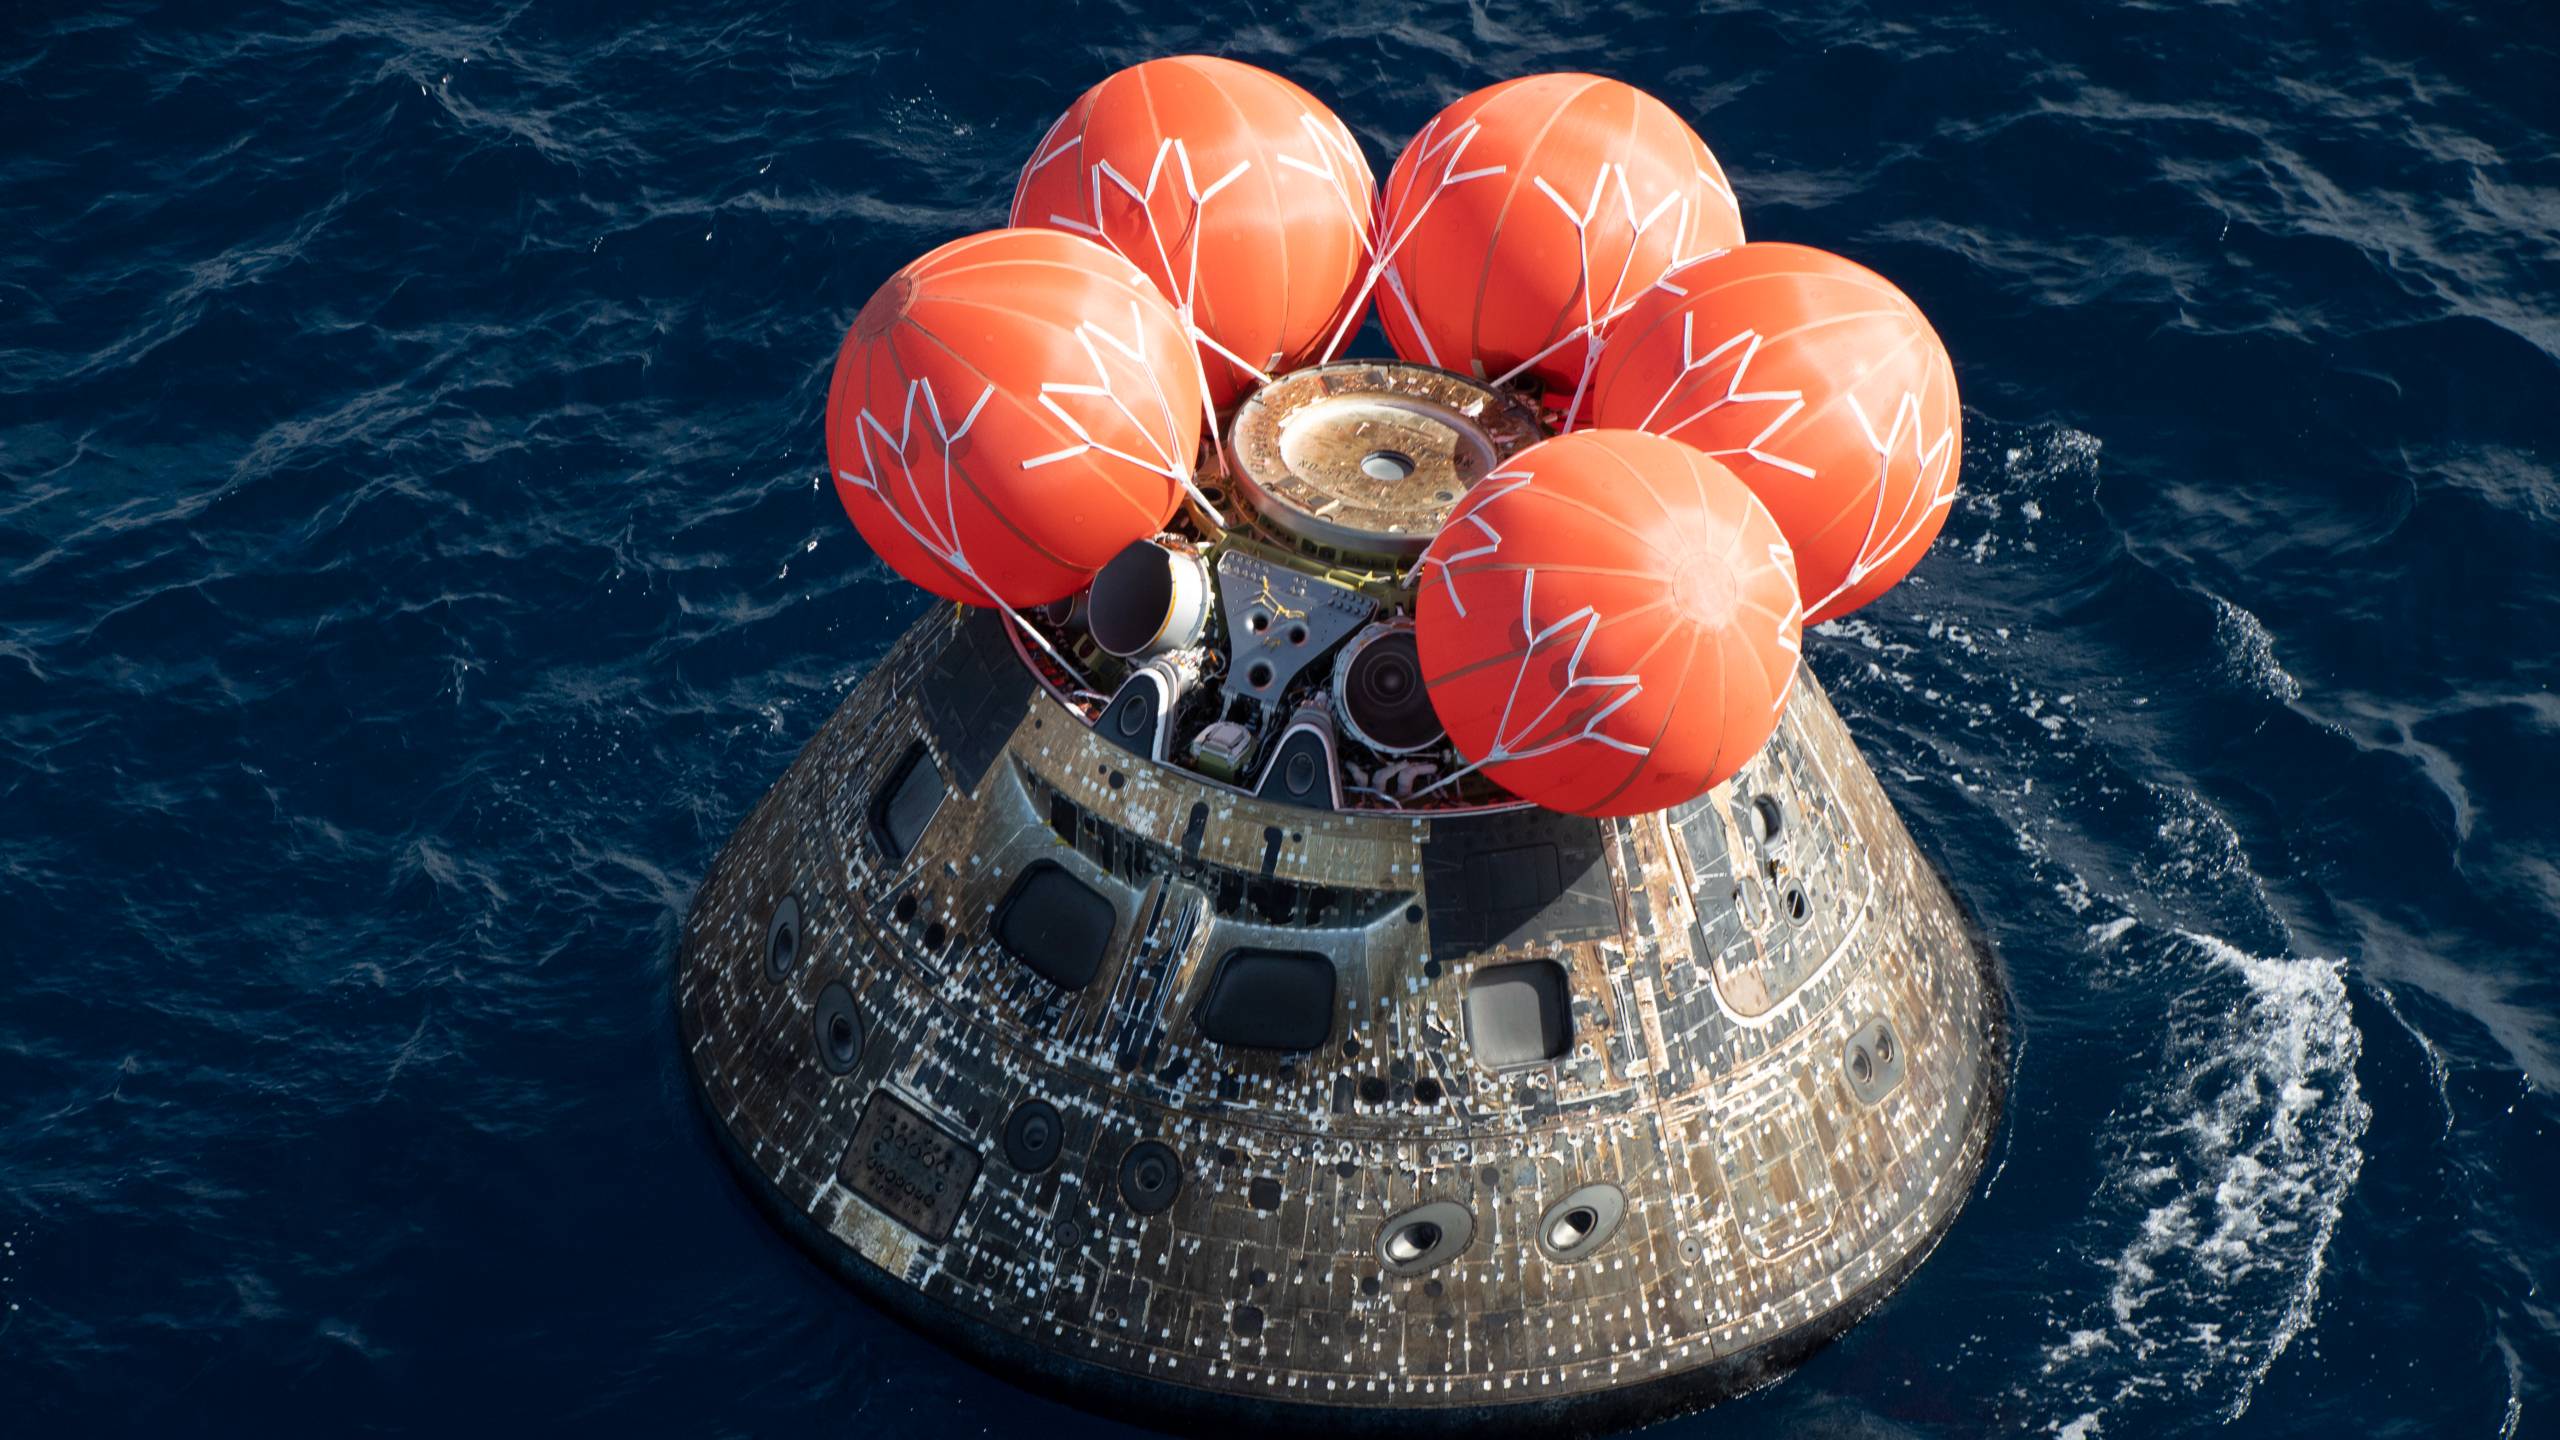 a cone-shaped spacecraft in the ocean with three inflatable balloons on top